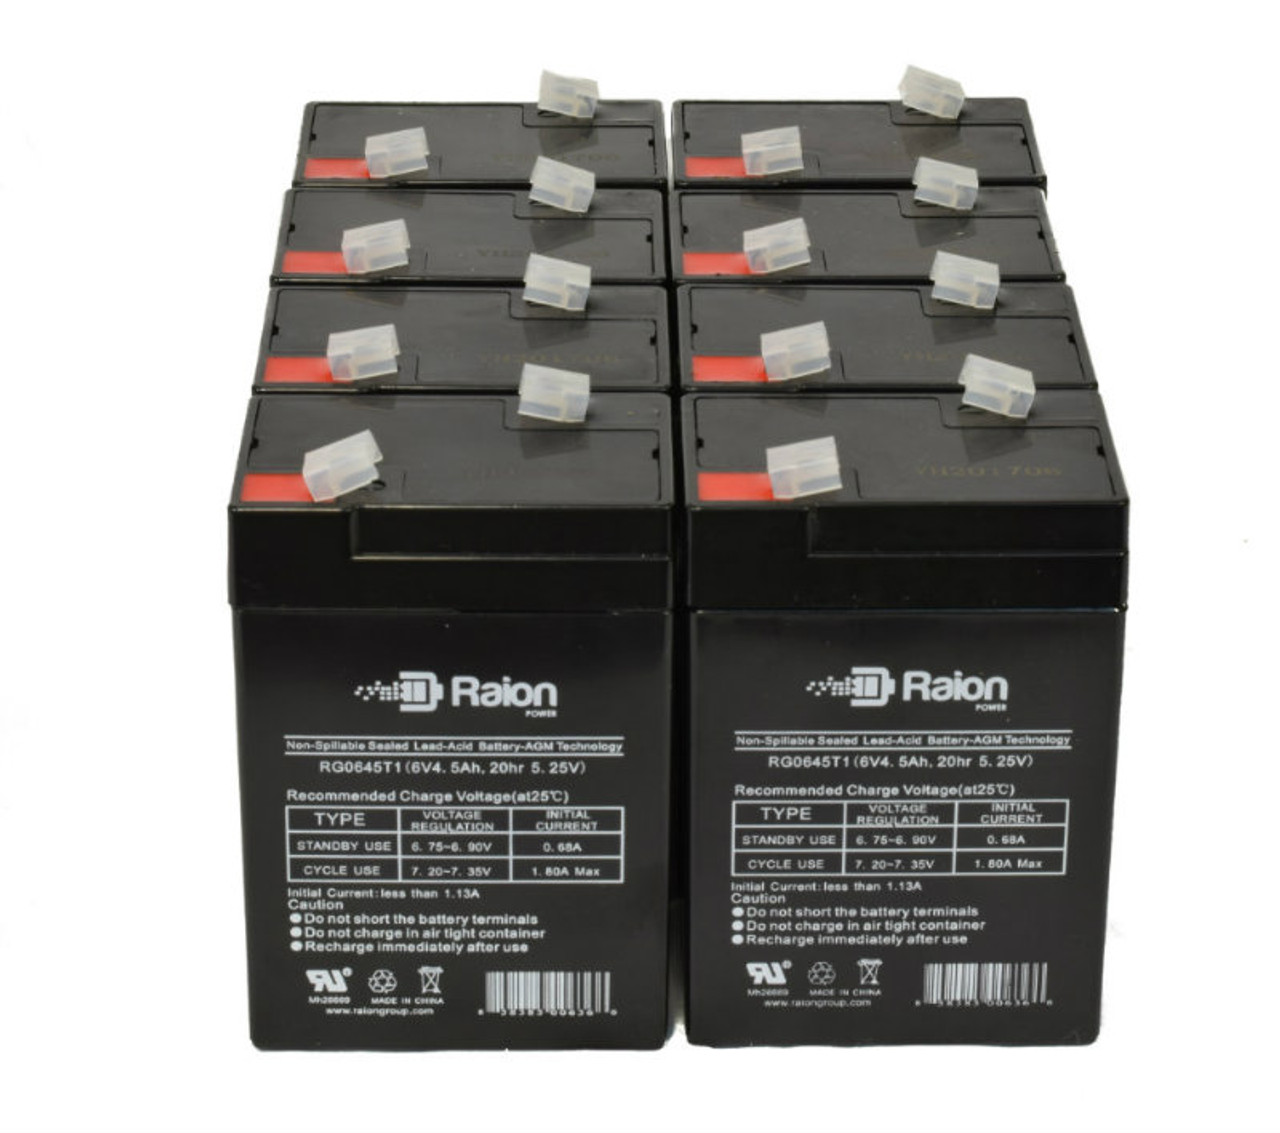 Raion Power 6 Volt 4.5Ah RG0645T1 Replacement Battery for Champion NP5-6 - 8 Pack